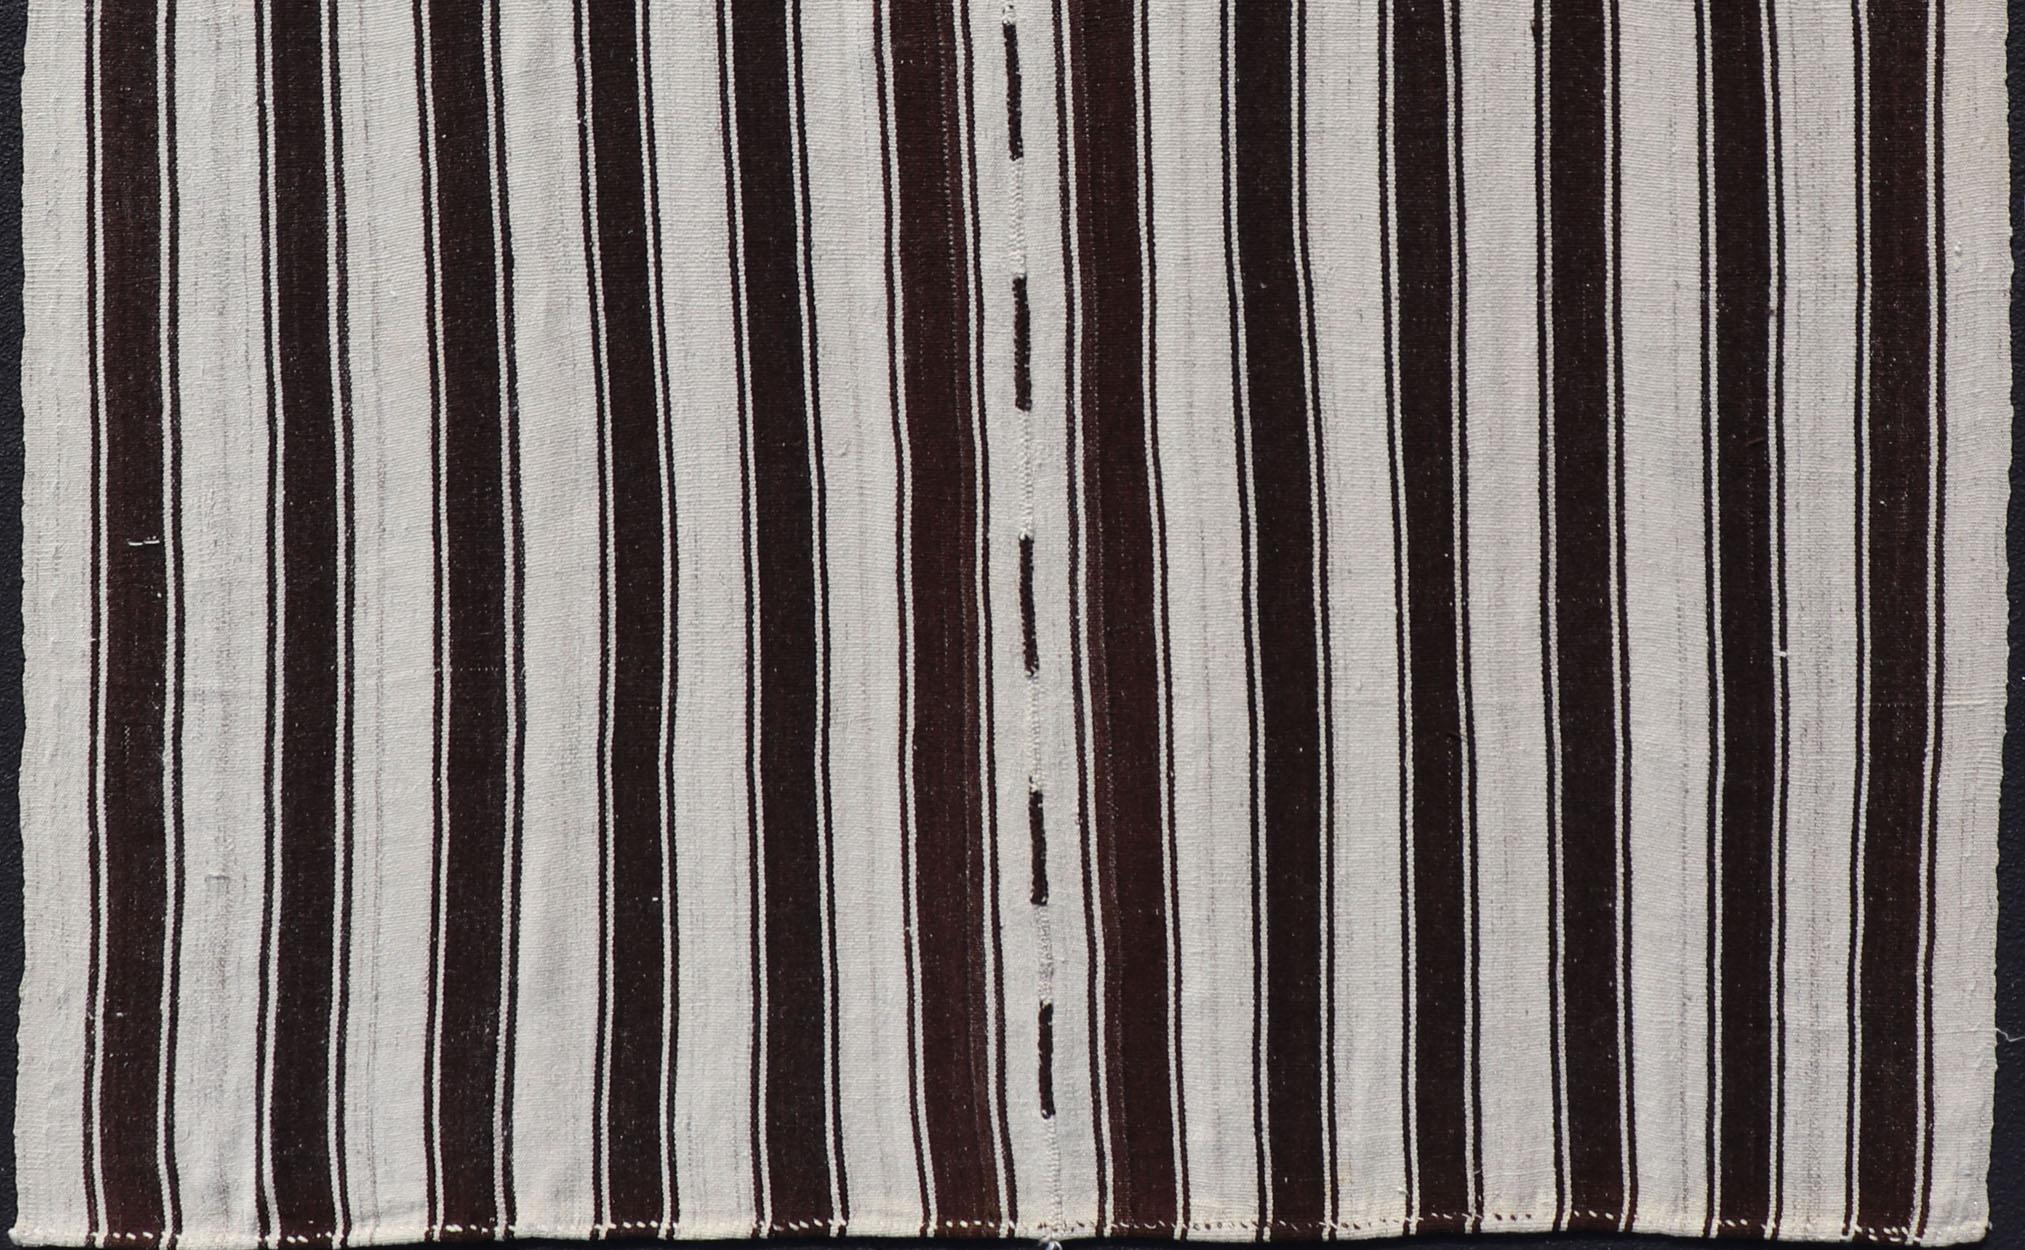 Vintage Turkish Kilim Rug with Vertical Stripes in Chocolate Brown and Cream In Good Condition For Sale In Atlanta, GA